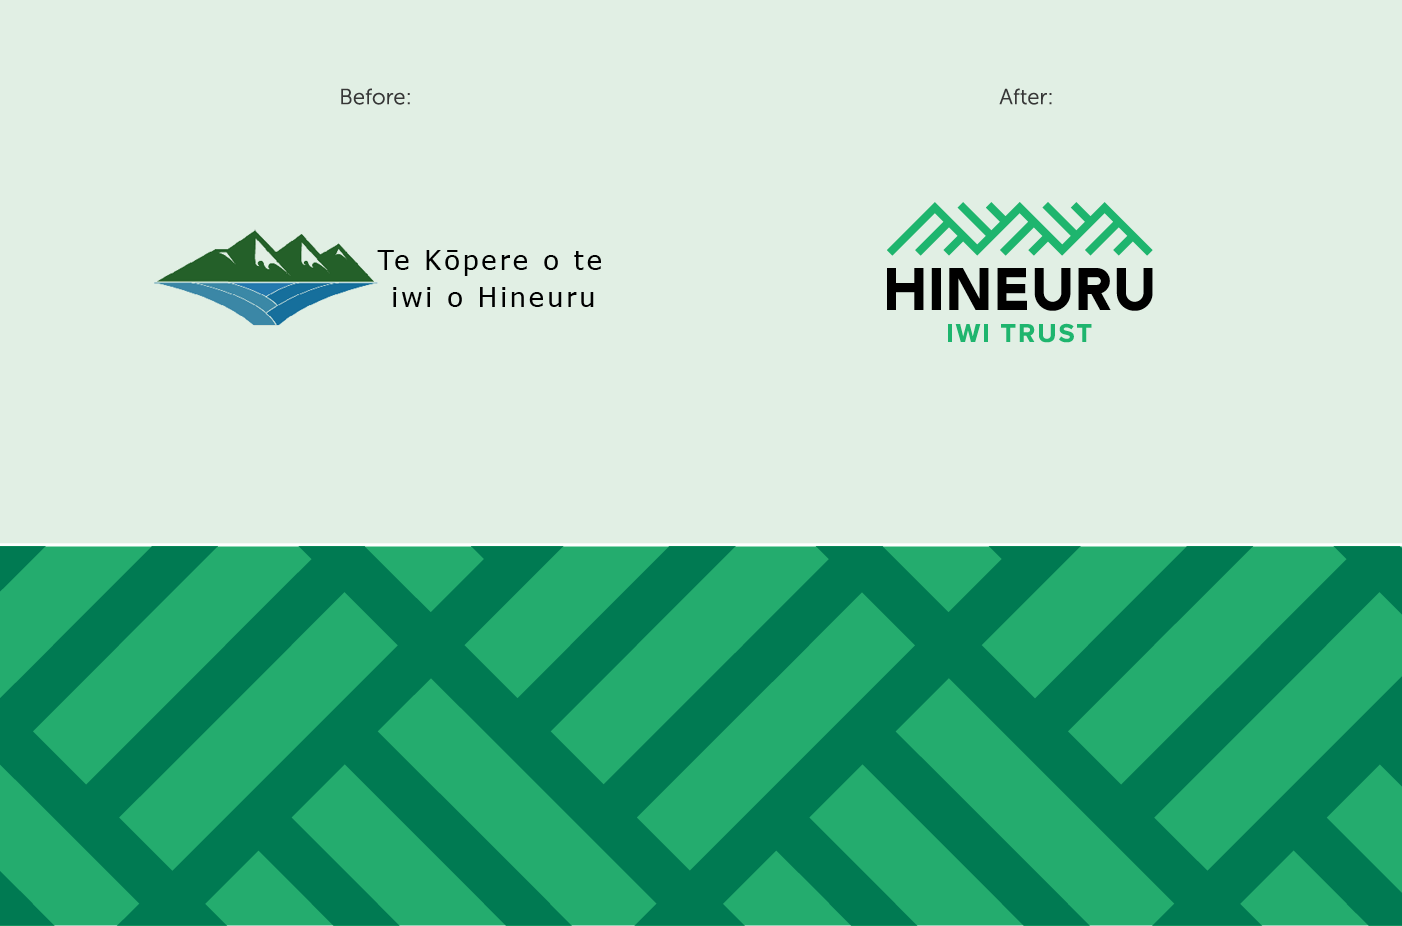 Old Hineuru Iwi Trust logo and logo after refresh and pattern detail from logo